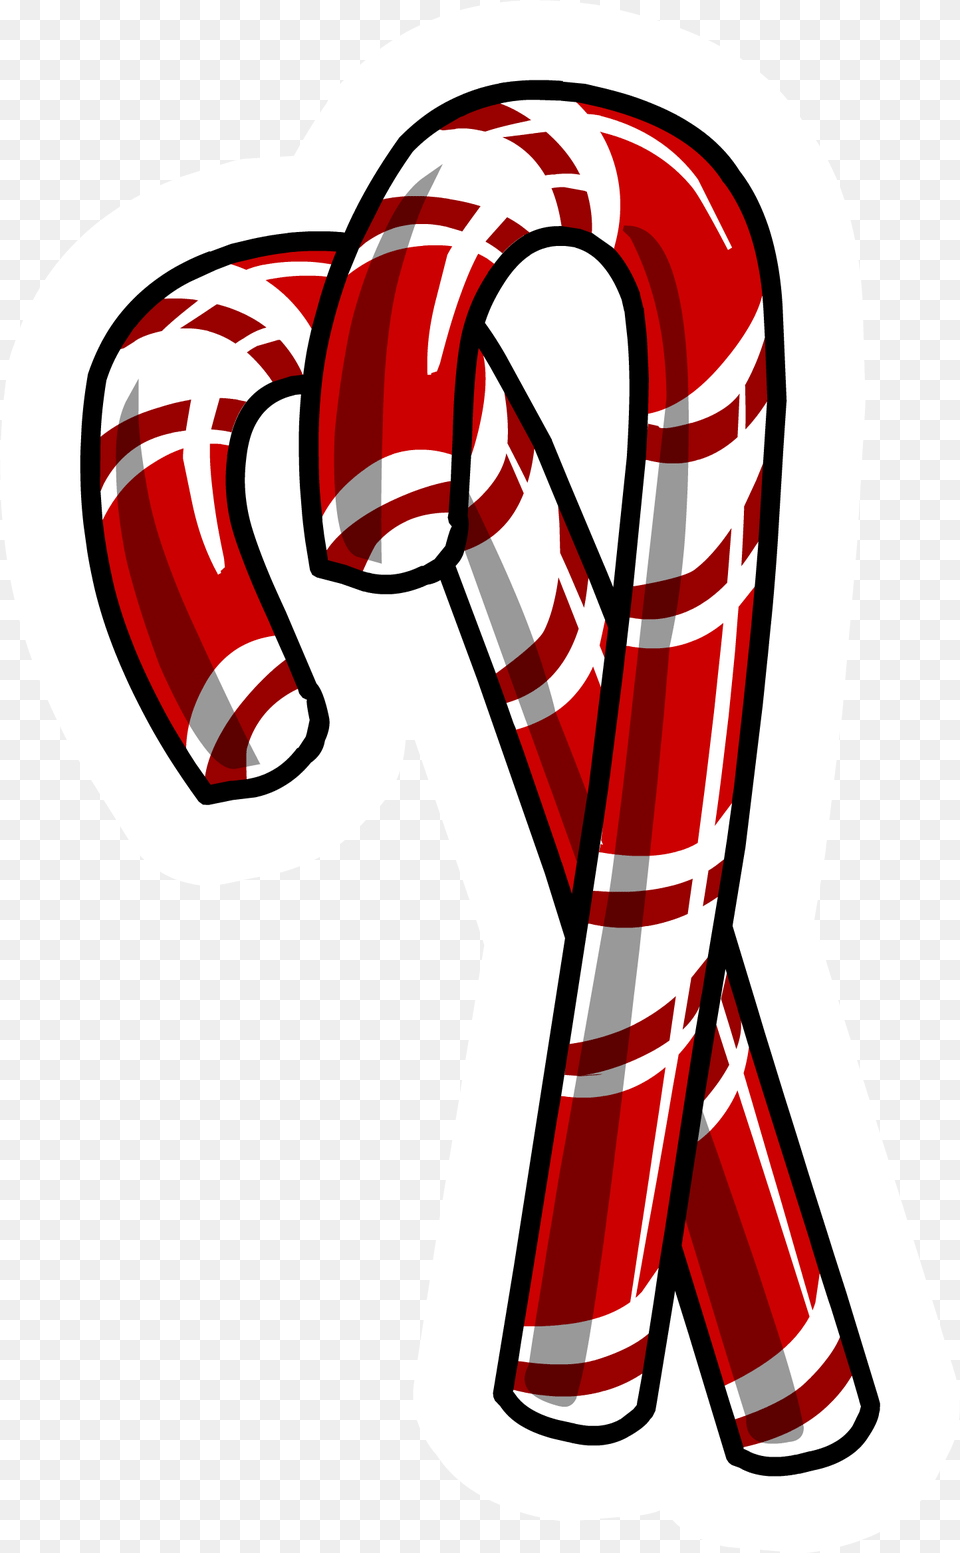 Candy Cane Duo Pin Club Penguin Wiki Fandom Powered High Resolution Candy Cane Svg, Dynamite, Weapon, Stick, Food Png Image